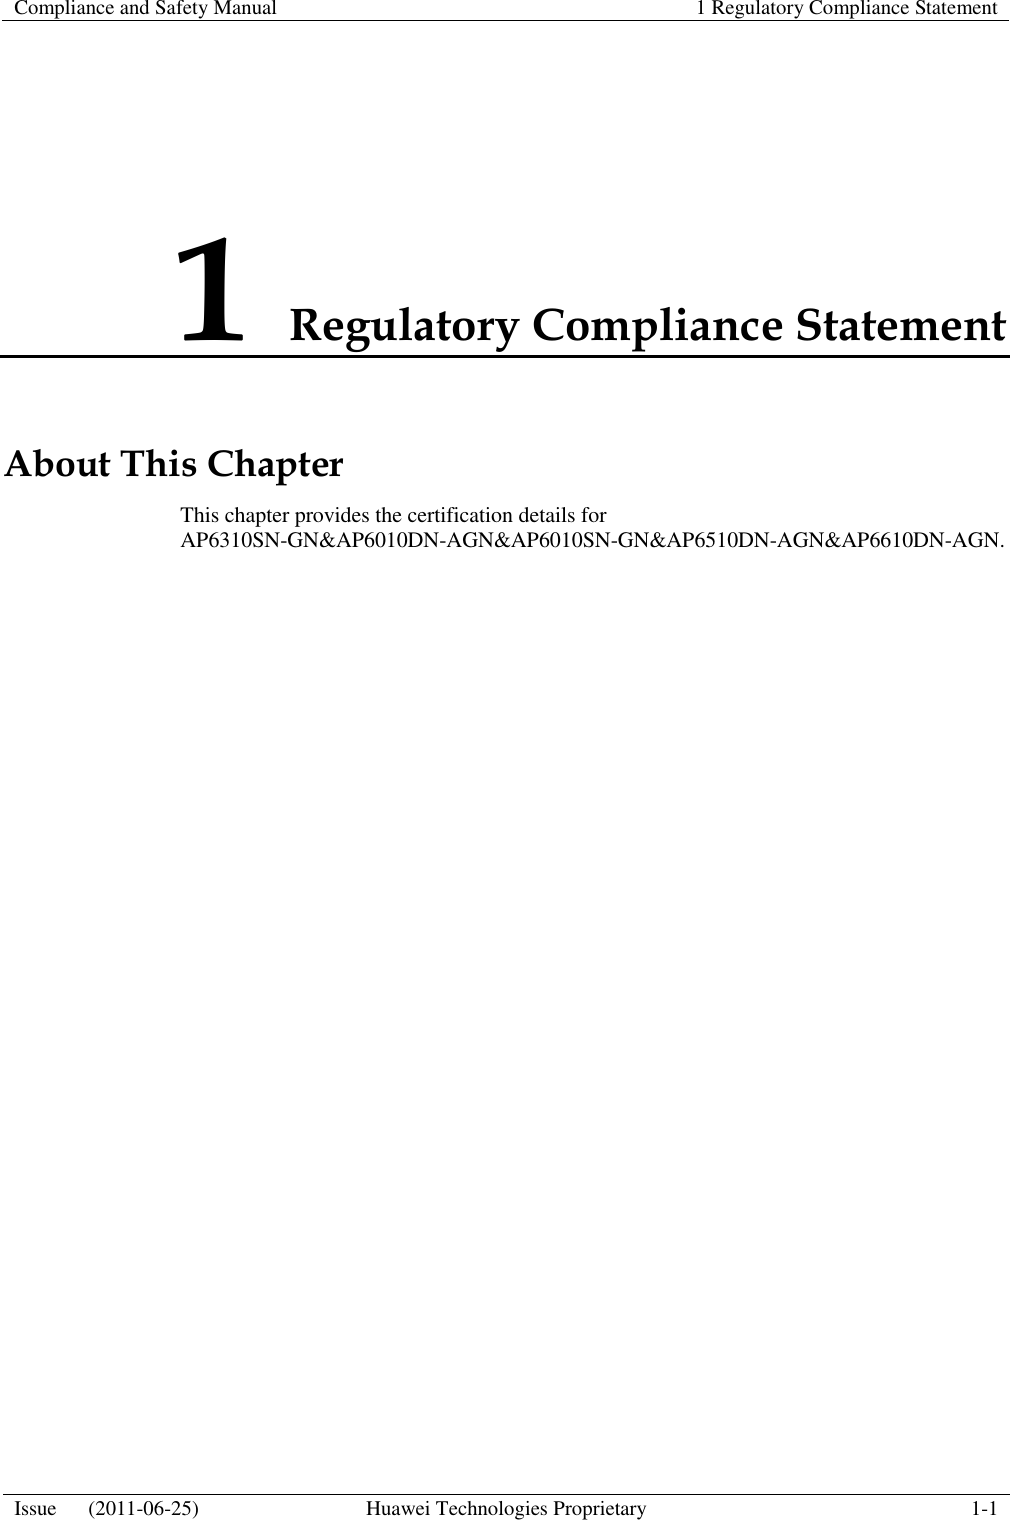    Compliance and Safety Manual 1 Regulatory Compliance Statement  Issue      (2011-06-25) Huawei Technologies Proprietary 1-1  1 Regulatory Compliance Statement About This Chapter This chapter provides the certification details for AP6310SN-GN&amp;AP6010DN-AGN&amp;AP6010SN-GN&amp;AP6510DN-AGN&amp;AP6610DN-AGN. 